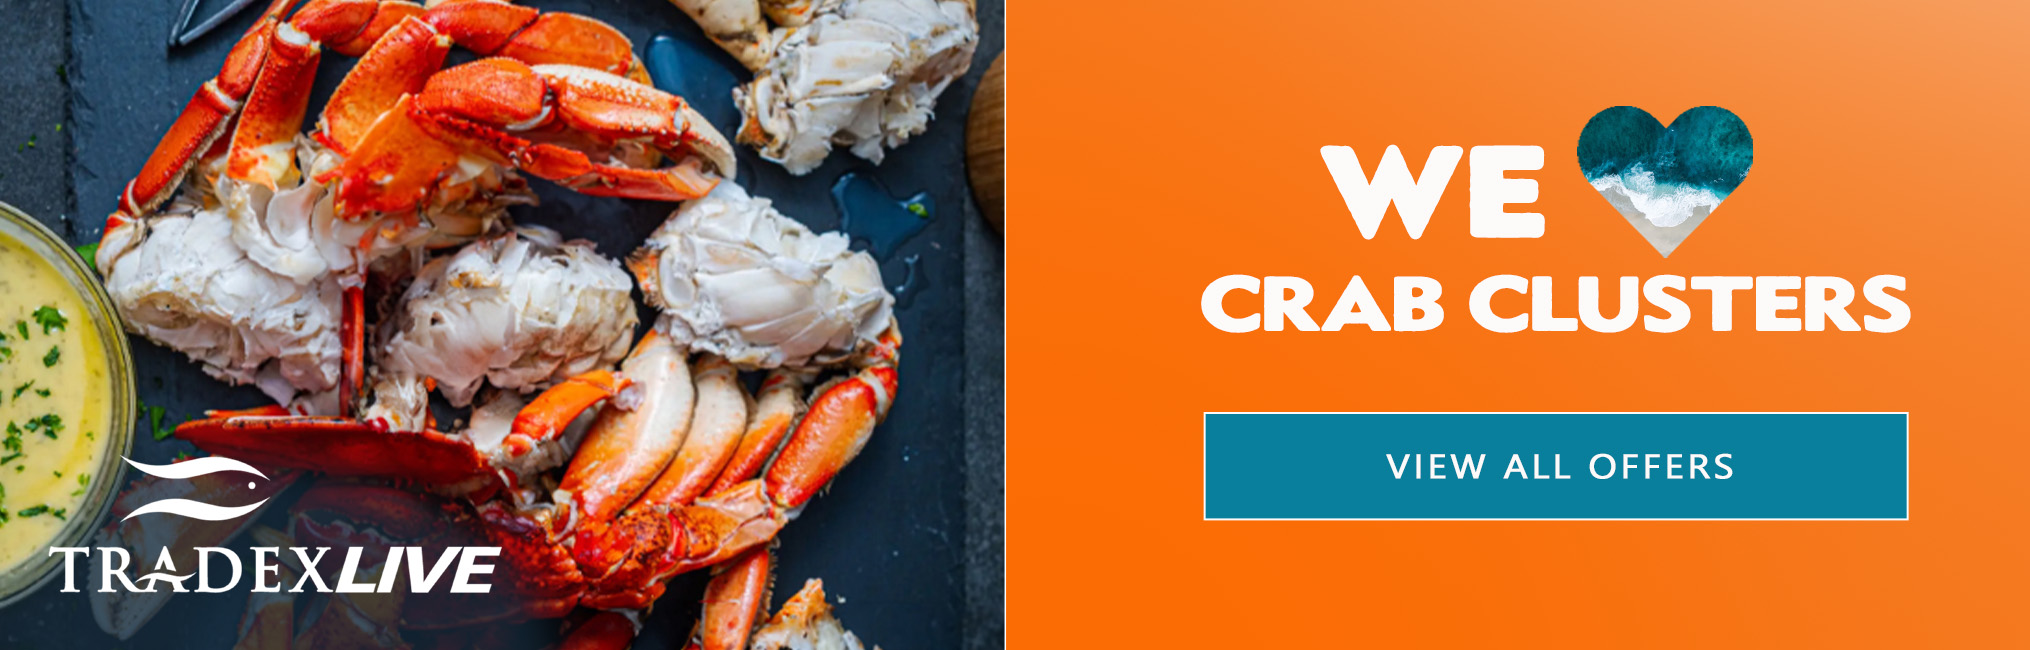 TRADEXLIVE - VIEW ALL OFFERS ON CRAB CLUSTERS